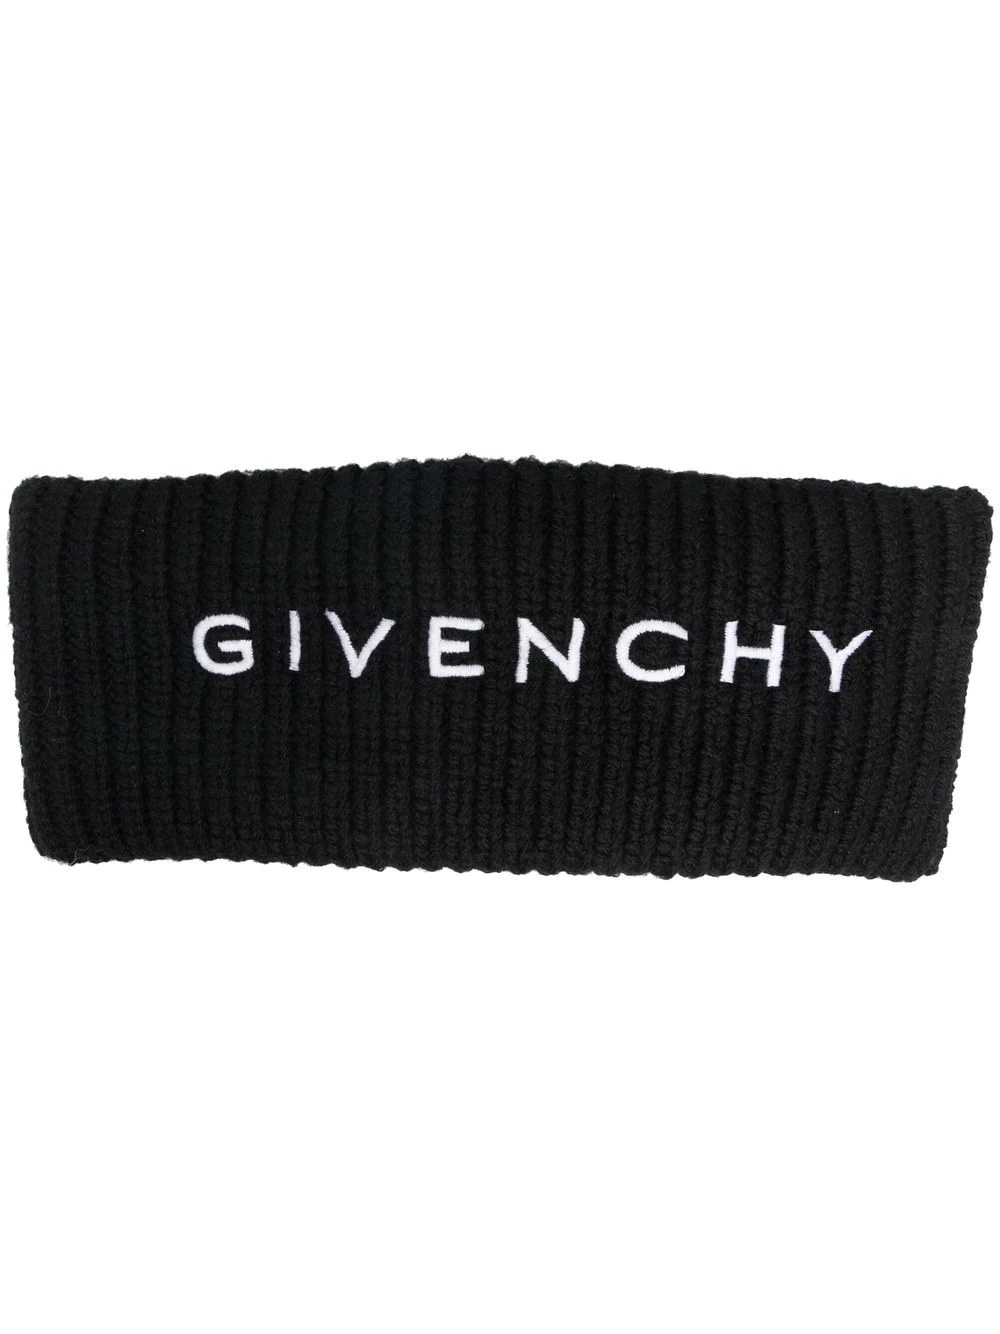 embroidered-logo head band - 1